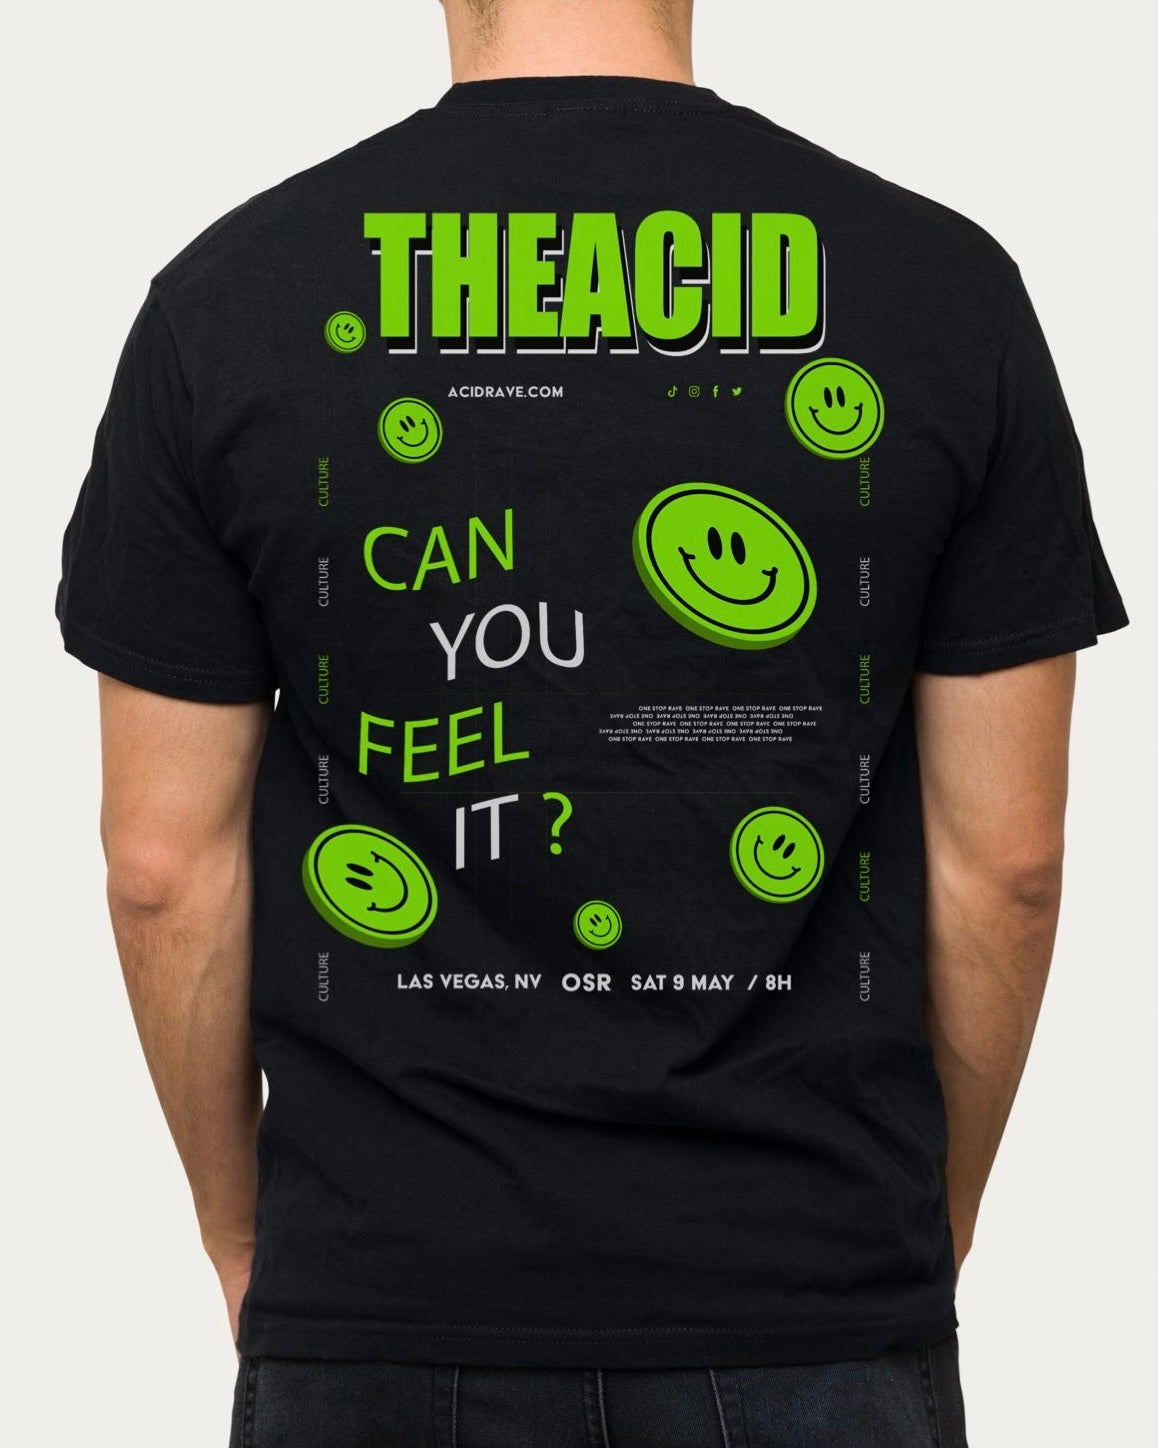 Can You Feel It? T-Shirt